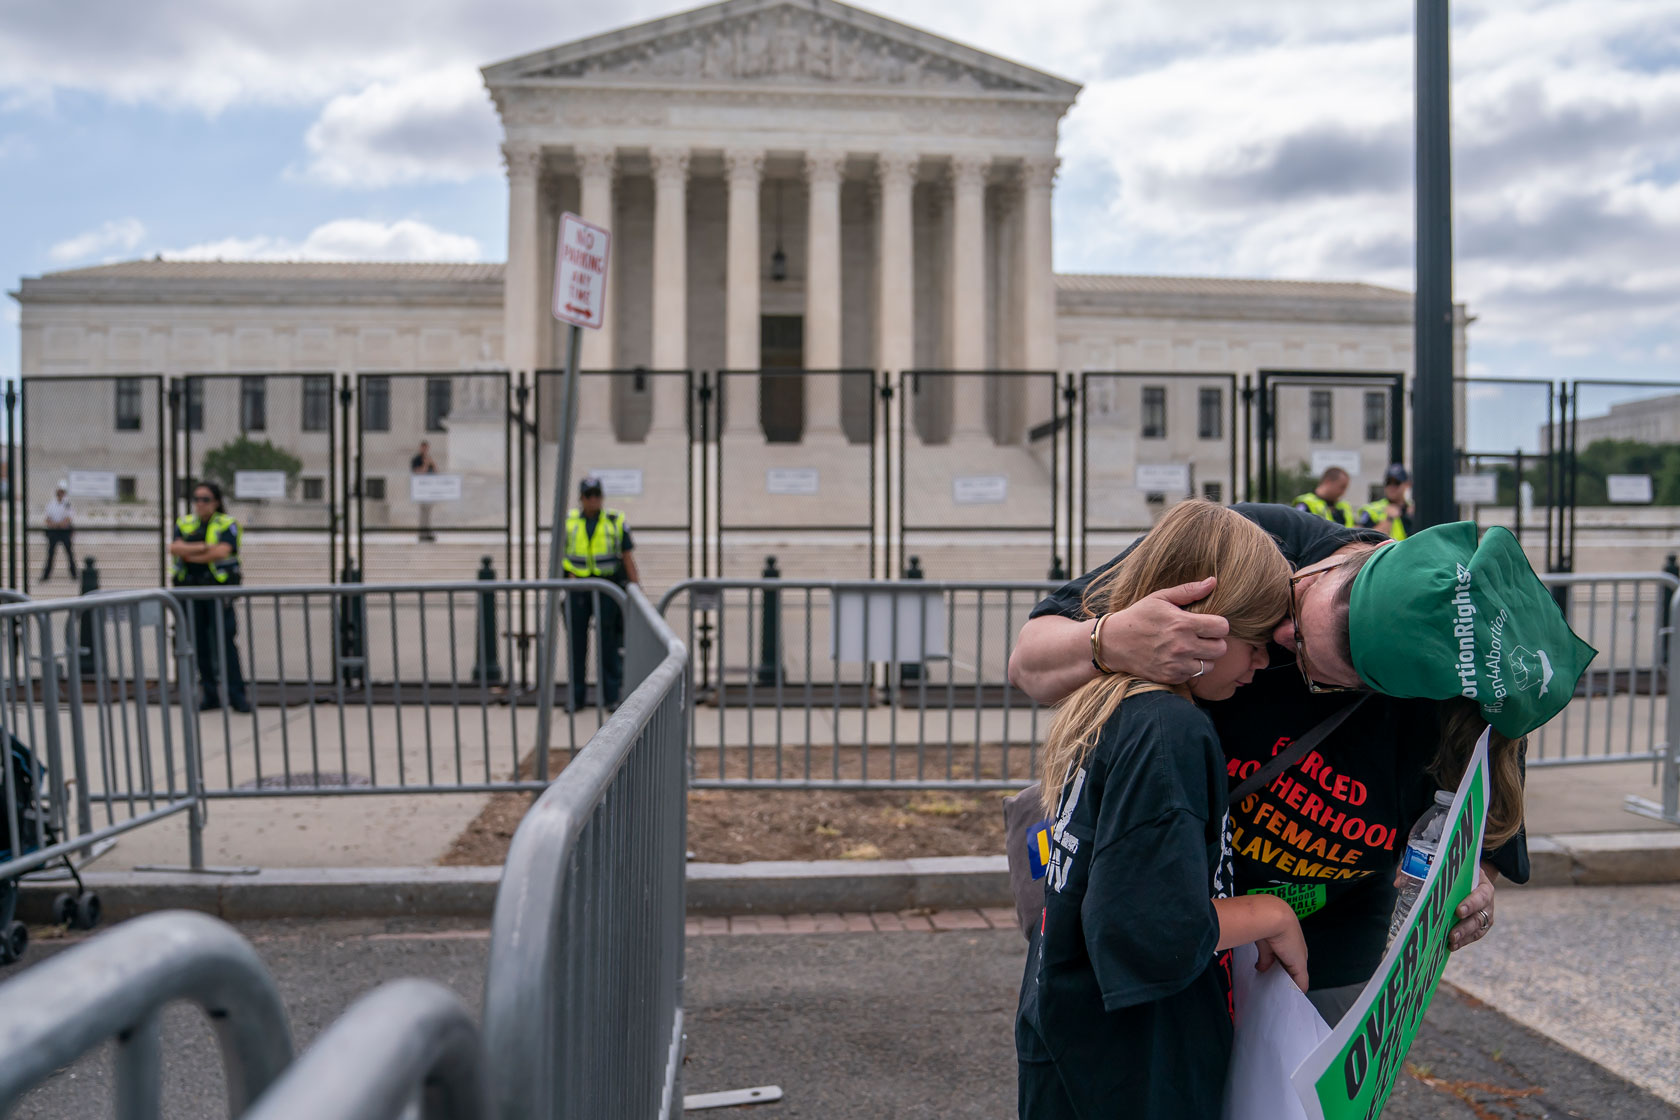 An abortion rights activist comforts her daughter following the 6-3 Supreme Court ruling in Dobbs v. Jackson Women's Health Organization.